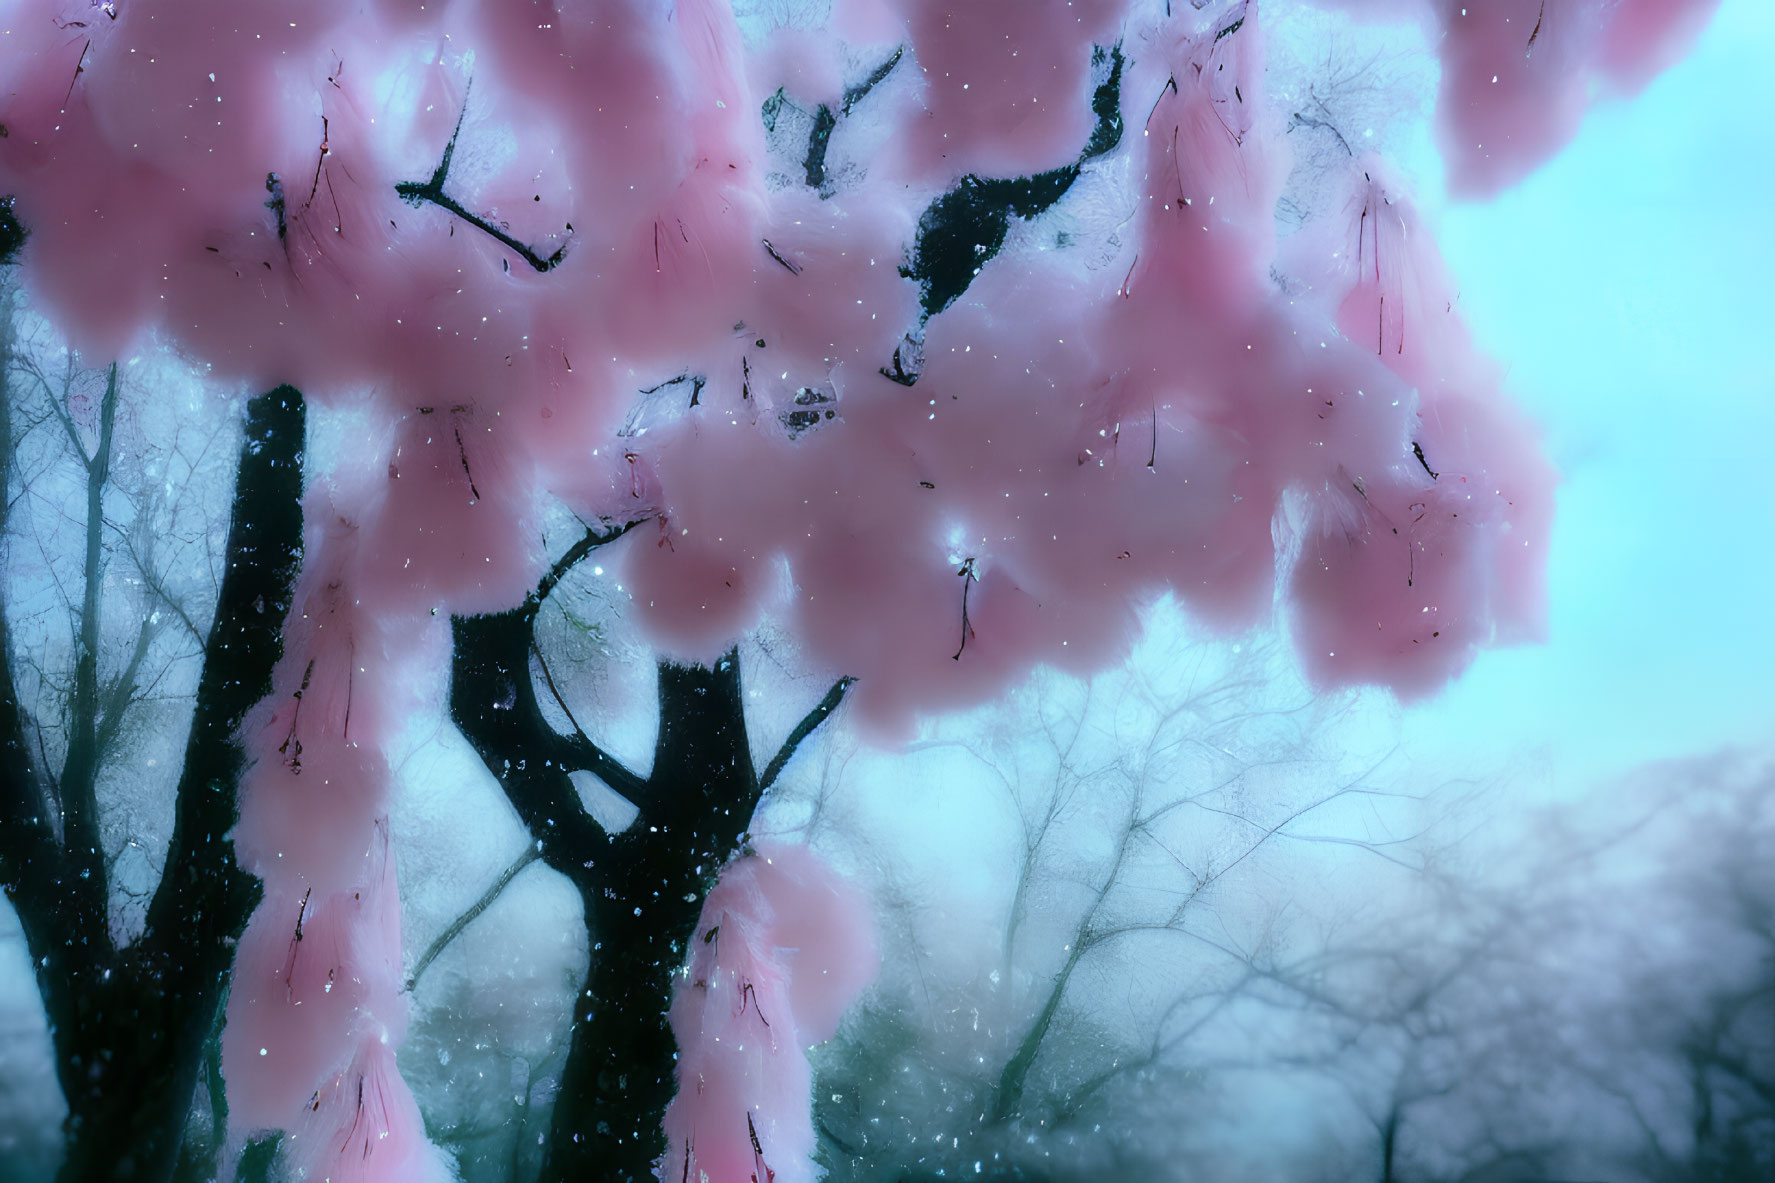 Pink cherry blossoms covered in snow against wintry backdrop